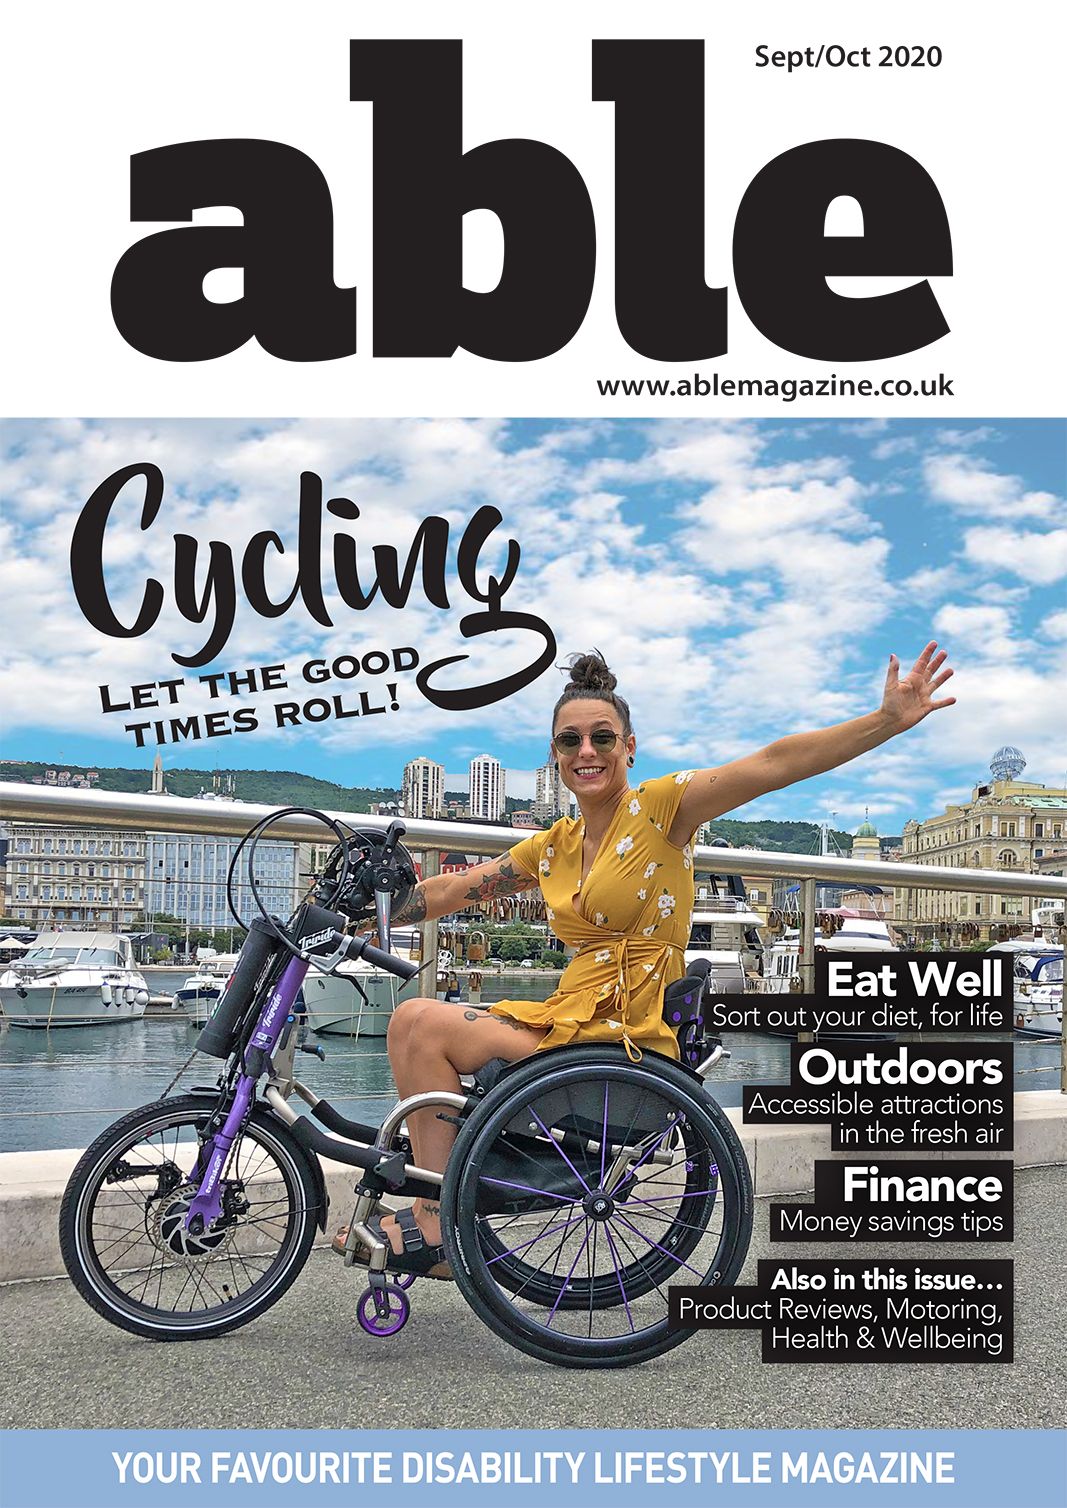 Picture of the Able Magazine September cover.